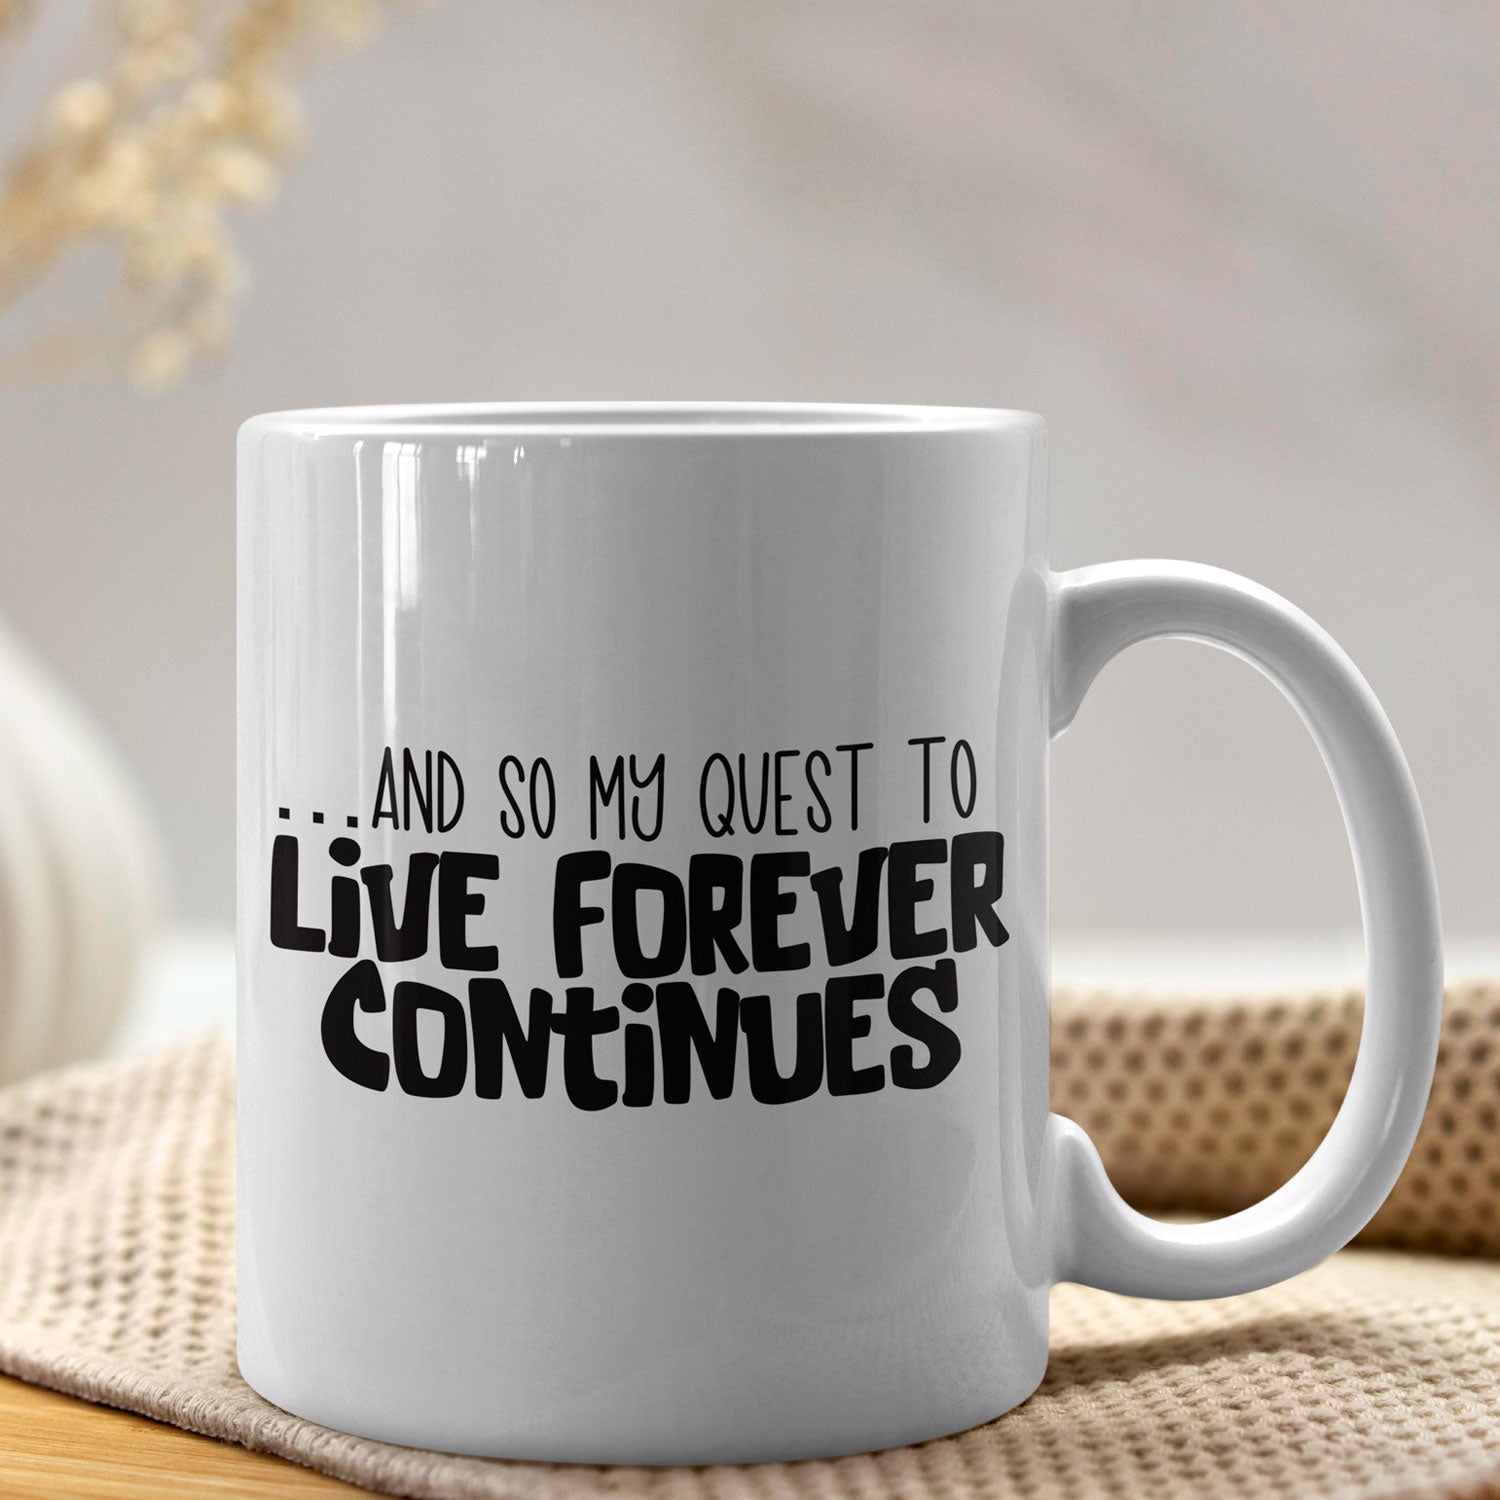 And so my quest to live forever continues - Funny Snarky Coffee Mug –  AdMoJo Designs